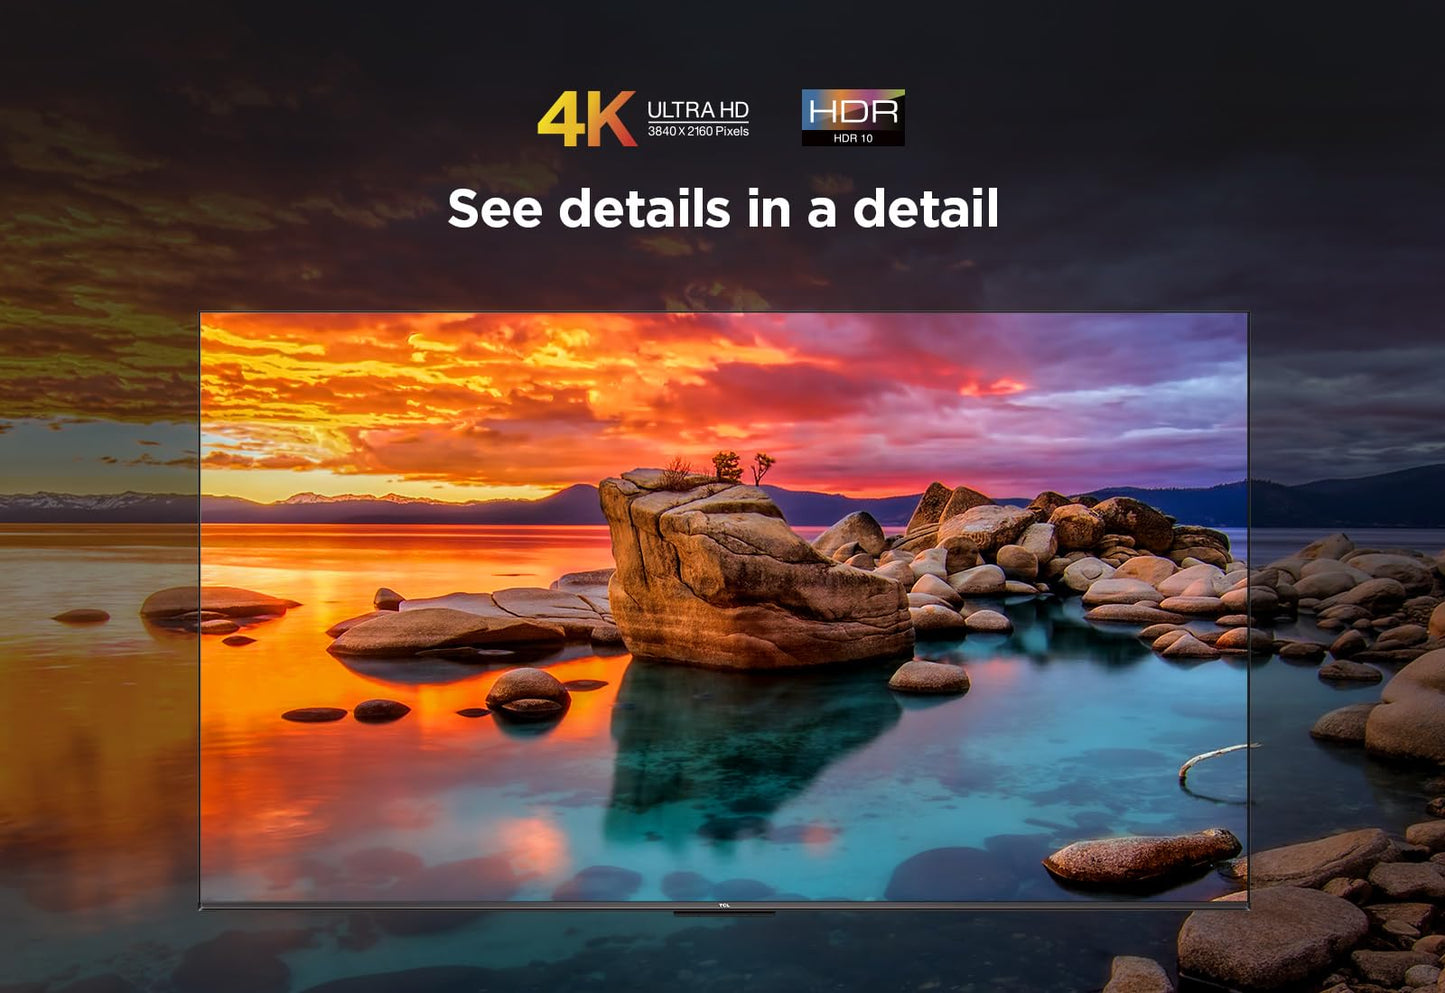 TCL 85 Inch 4K Ultra HD Smart TV, Google TV with 120Hz Game Accelerator, Dolby Vision & Atmos, HDR 10, Built-In Chromecast Assistant, 60HZ MEMC, 85P745 (2023 Model)